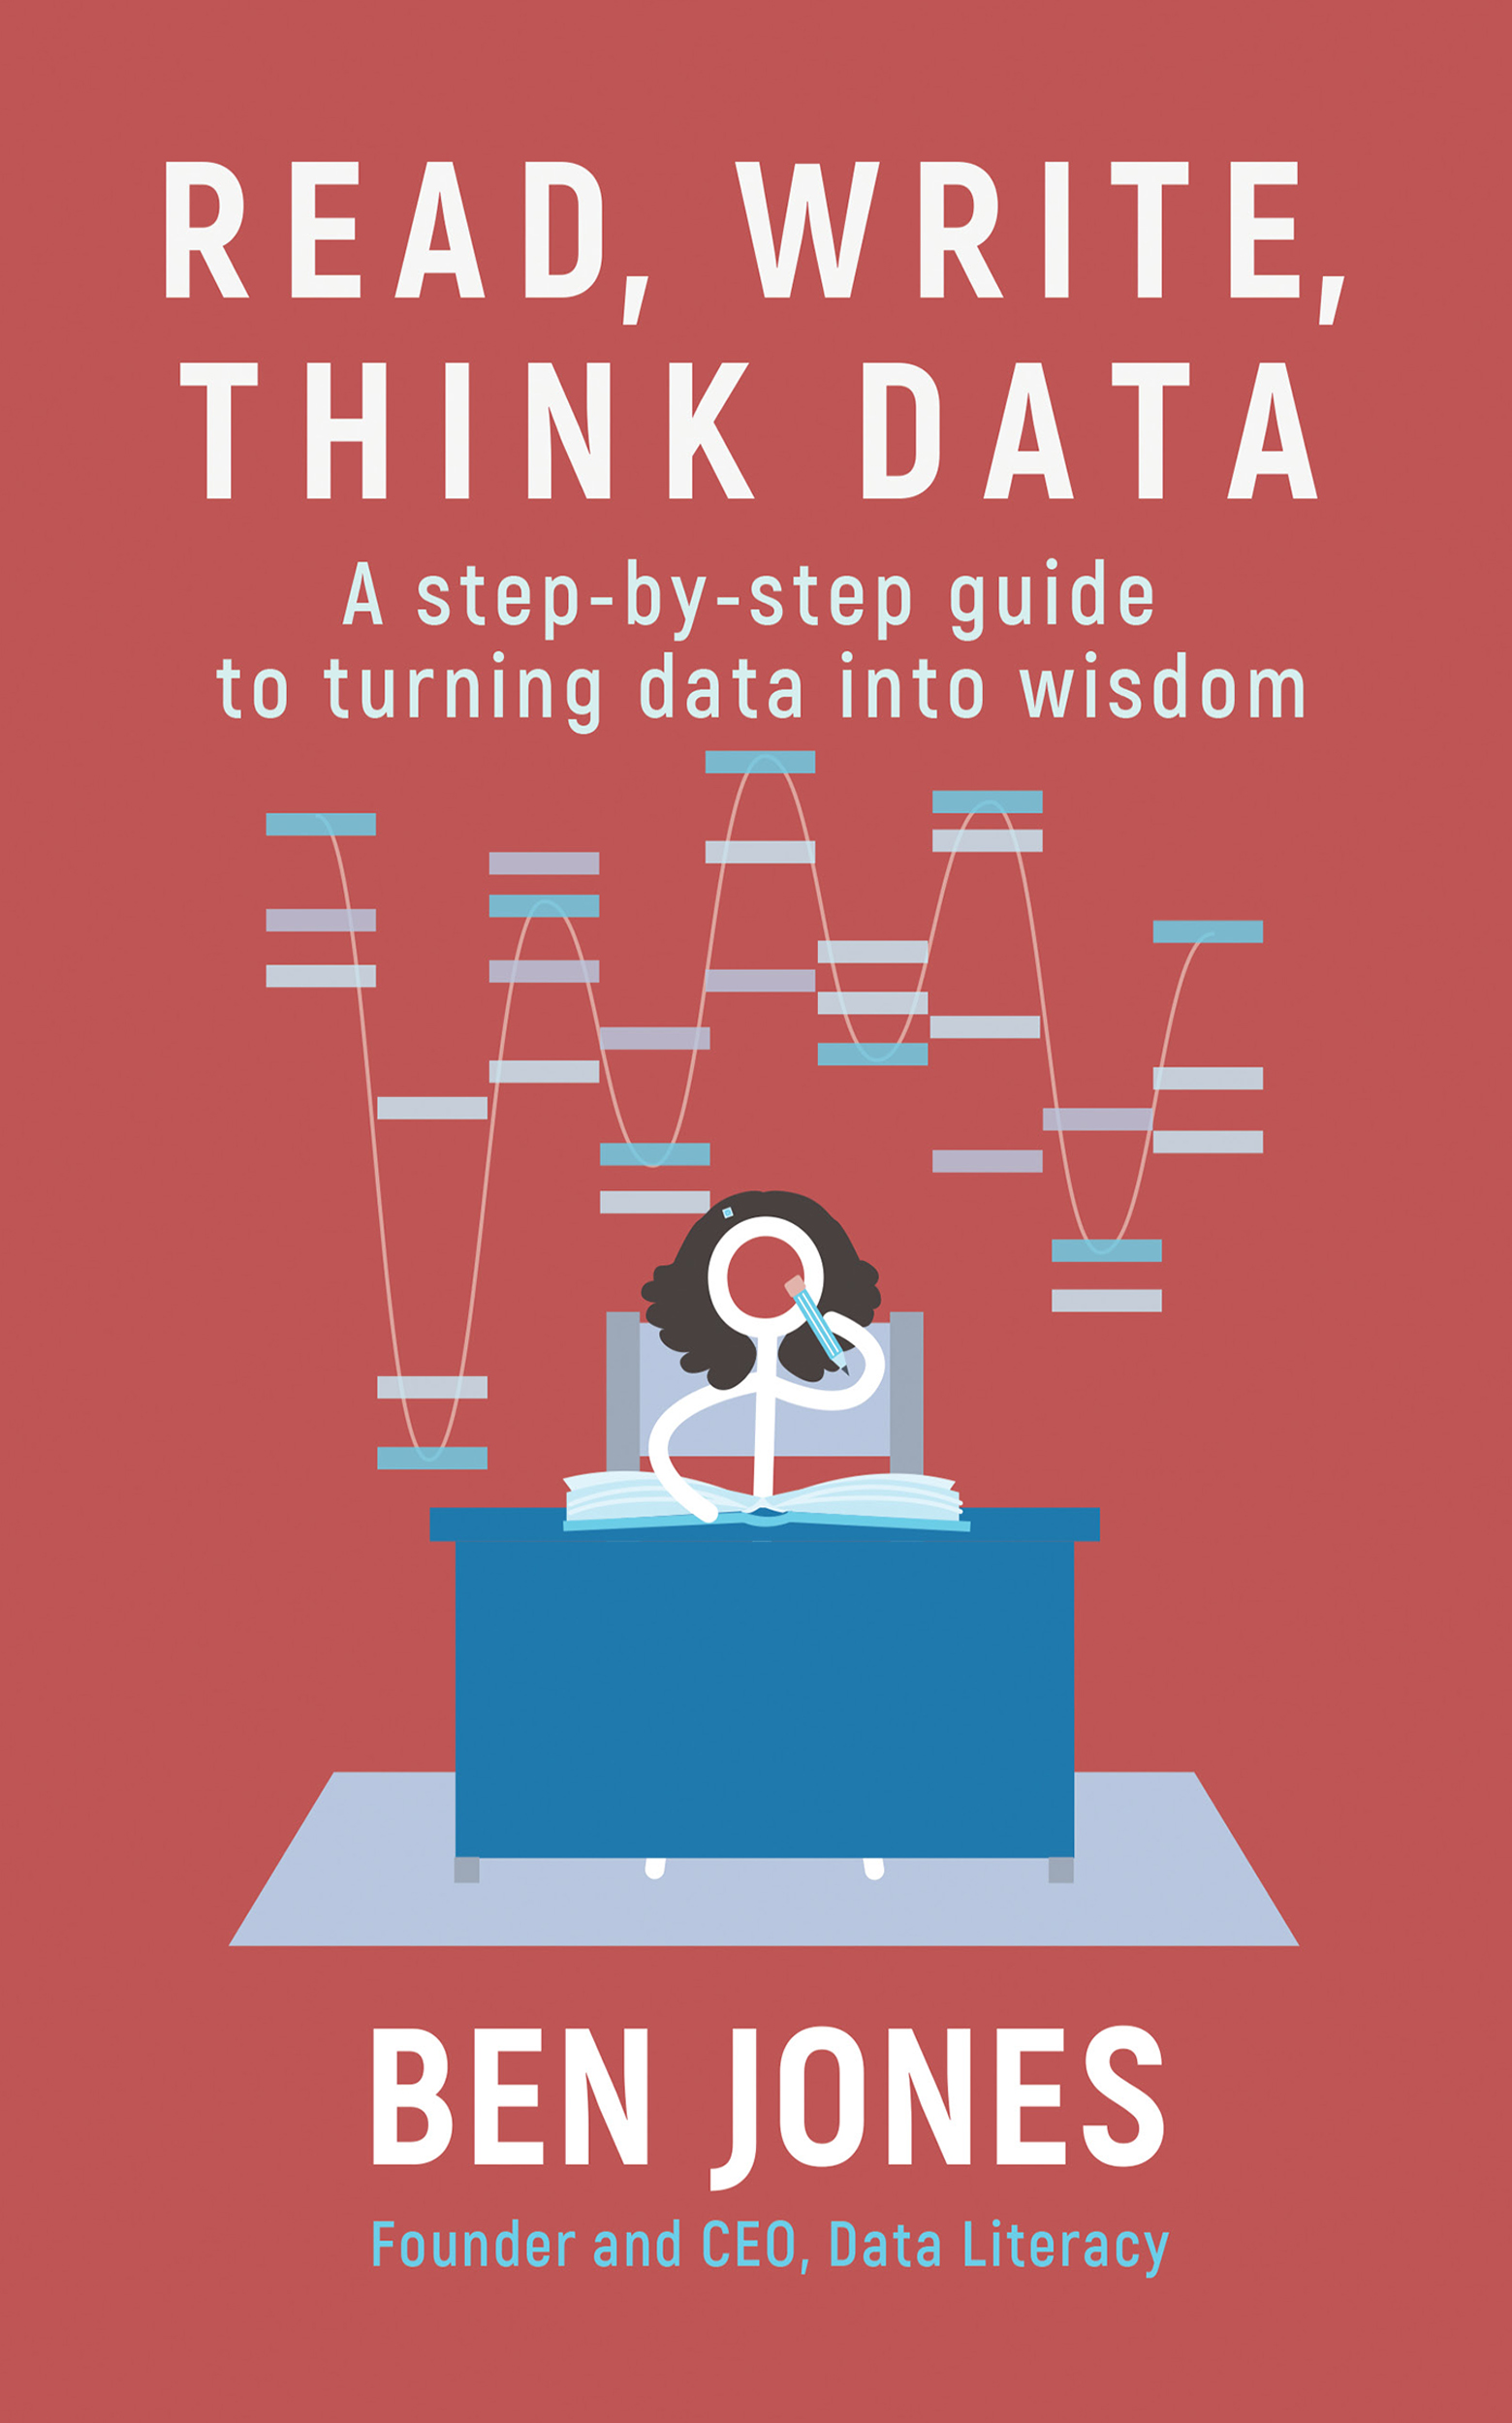 Book cover for Read Write Think Data by Ben Jones. The title is in white letters at the top. The tagline below it reads, also in white letters, A Step-by-Step Guide to Turning Data Into Wisdom. Below that is a stick figure image of Hedy Lamar sitting at a desk with her feet poking out beneath. She holds a pencil and is thinking. Above her is an image inspired by frequency hopping - a concept employed by her 1942 patent for a Secret Communication System.